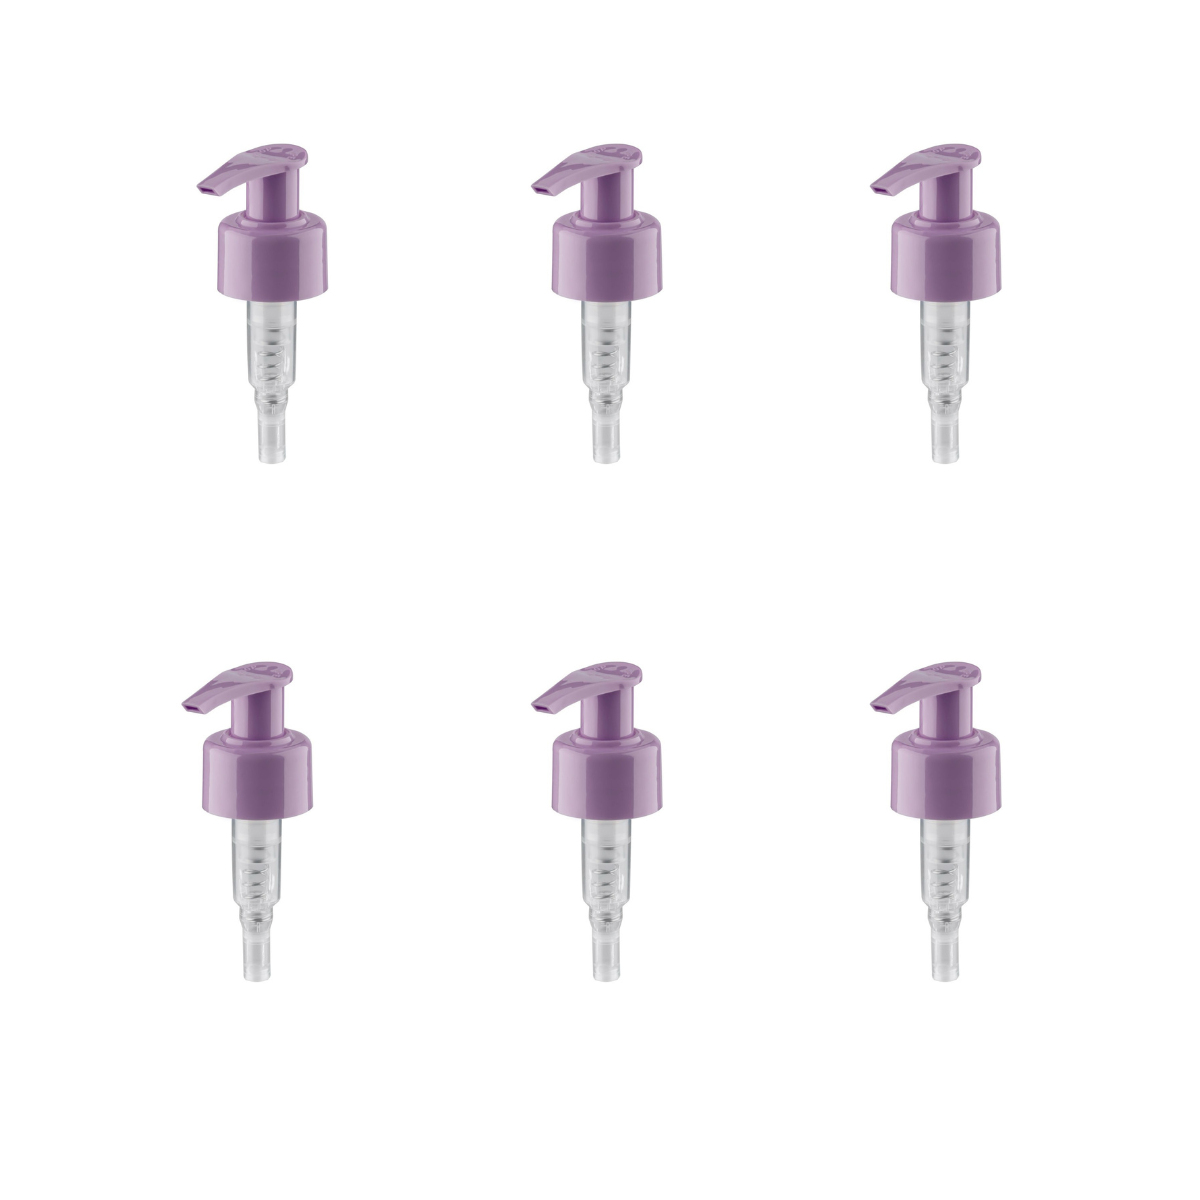 Dompel Pump valves, color lilac, thread 28/410, made with stainless steel springs and glass balls, Model 303-A1. (Pump heads only, bottles not included) - depilcompany